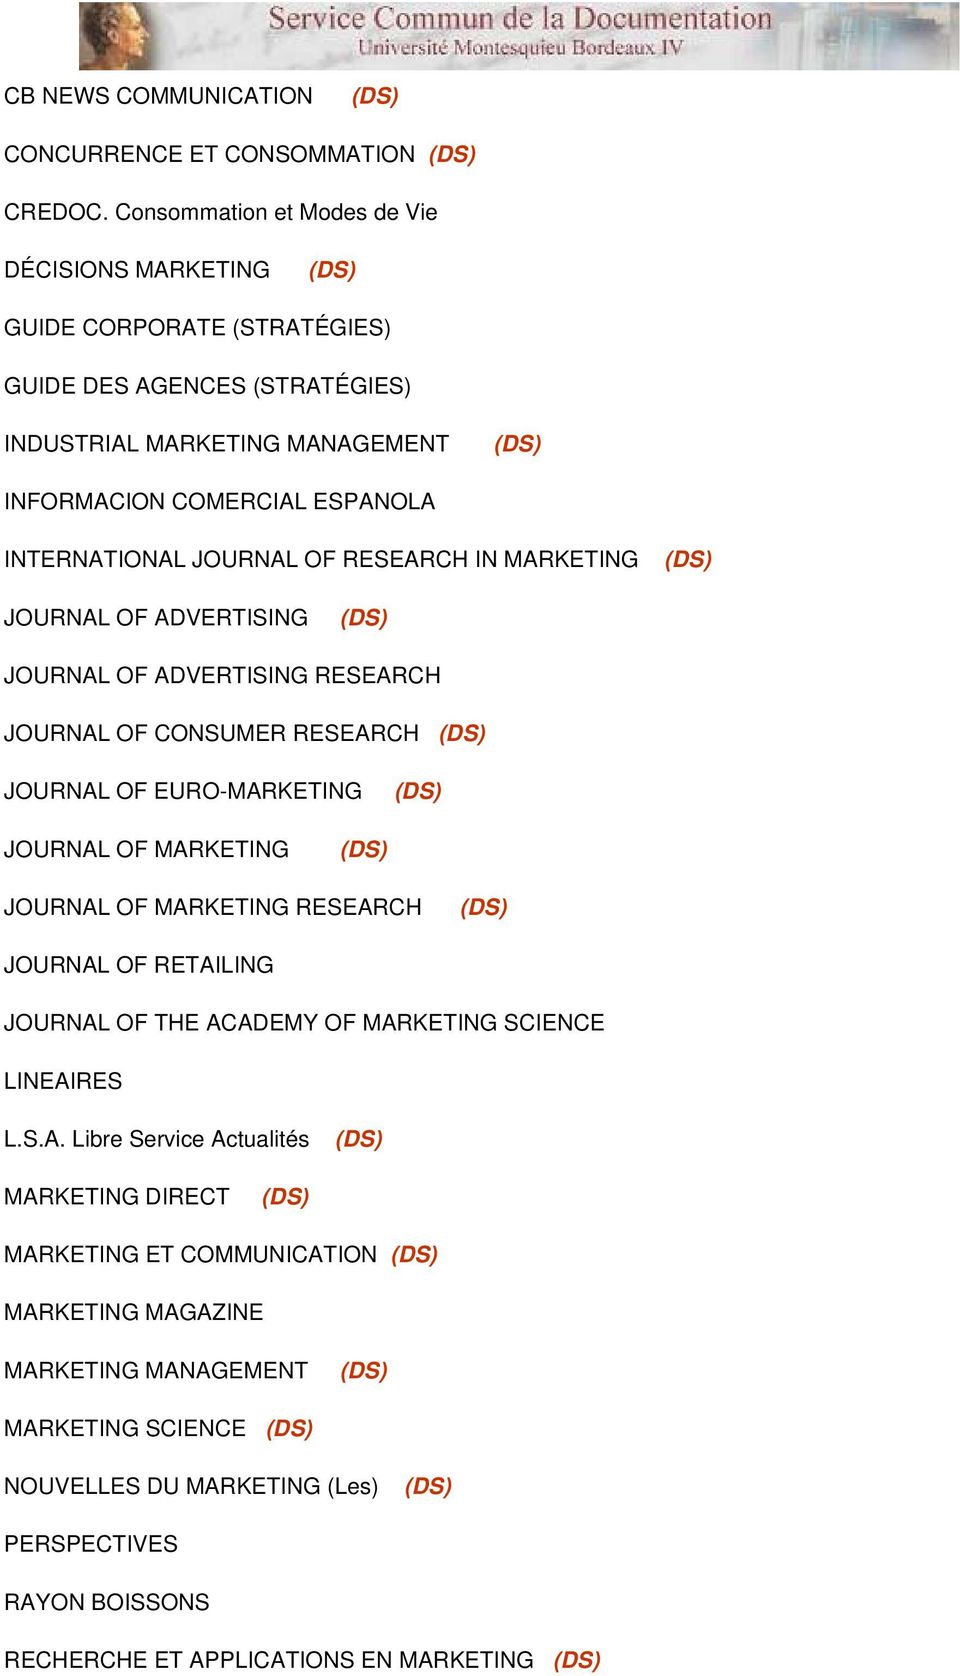 JOURNAL OF RESEARCH IN MARKETING JOURNAL OF ADVERTISING JOURNAL OF ADVERTISING RESEARCH JOURNAL OF CONSUMER RESEARCH JOURNAL OF EURO-MARKETING JOURNAL OF MARKETING JOURNAL OF MARKETING